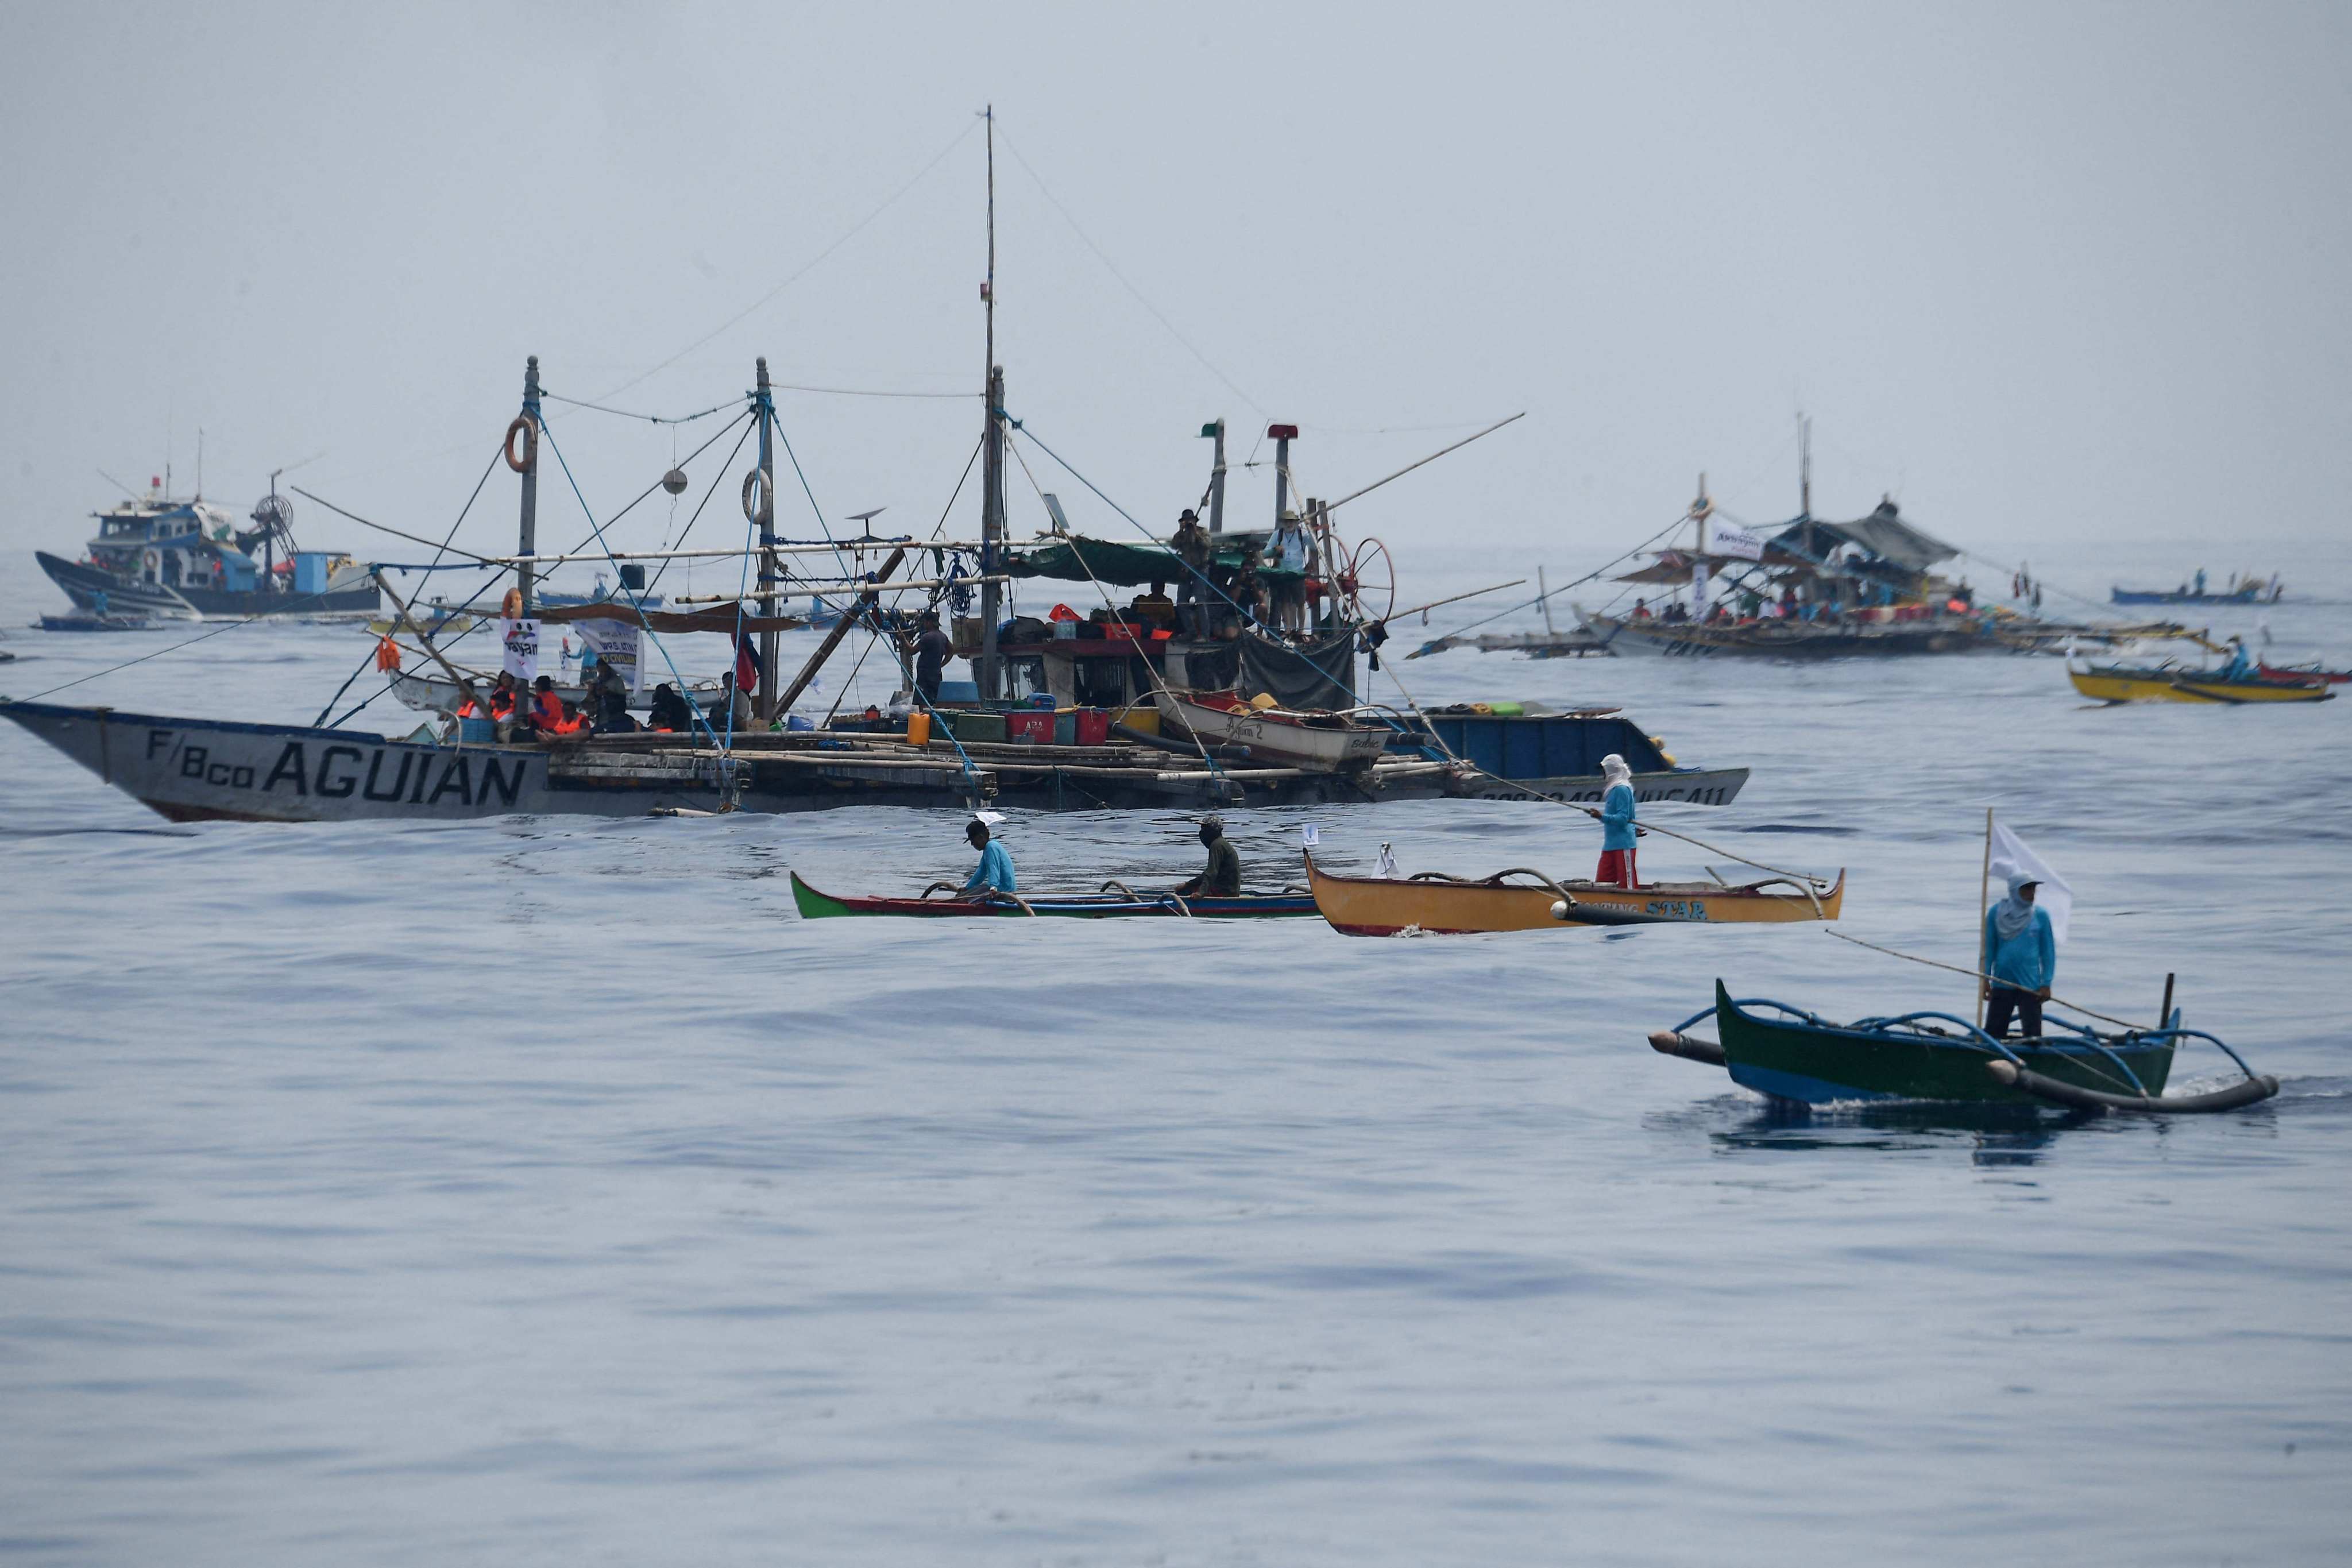 Philippine fishermen along with volunteers from a civilian-led mission Atin Ito Coalition arrive at a meeting point in the South China Sea on Wednesday. Photo: AFP